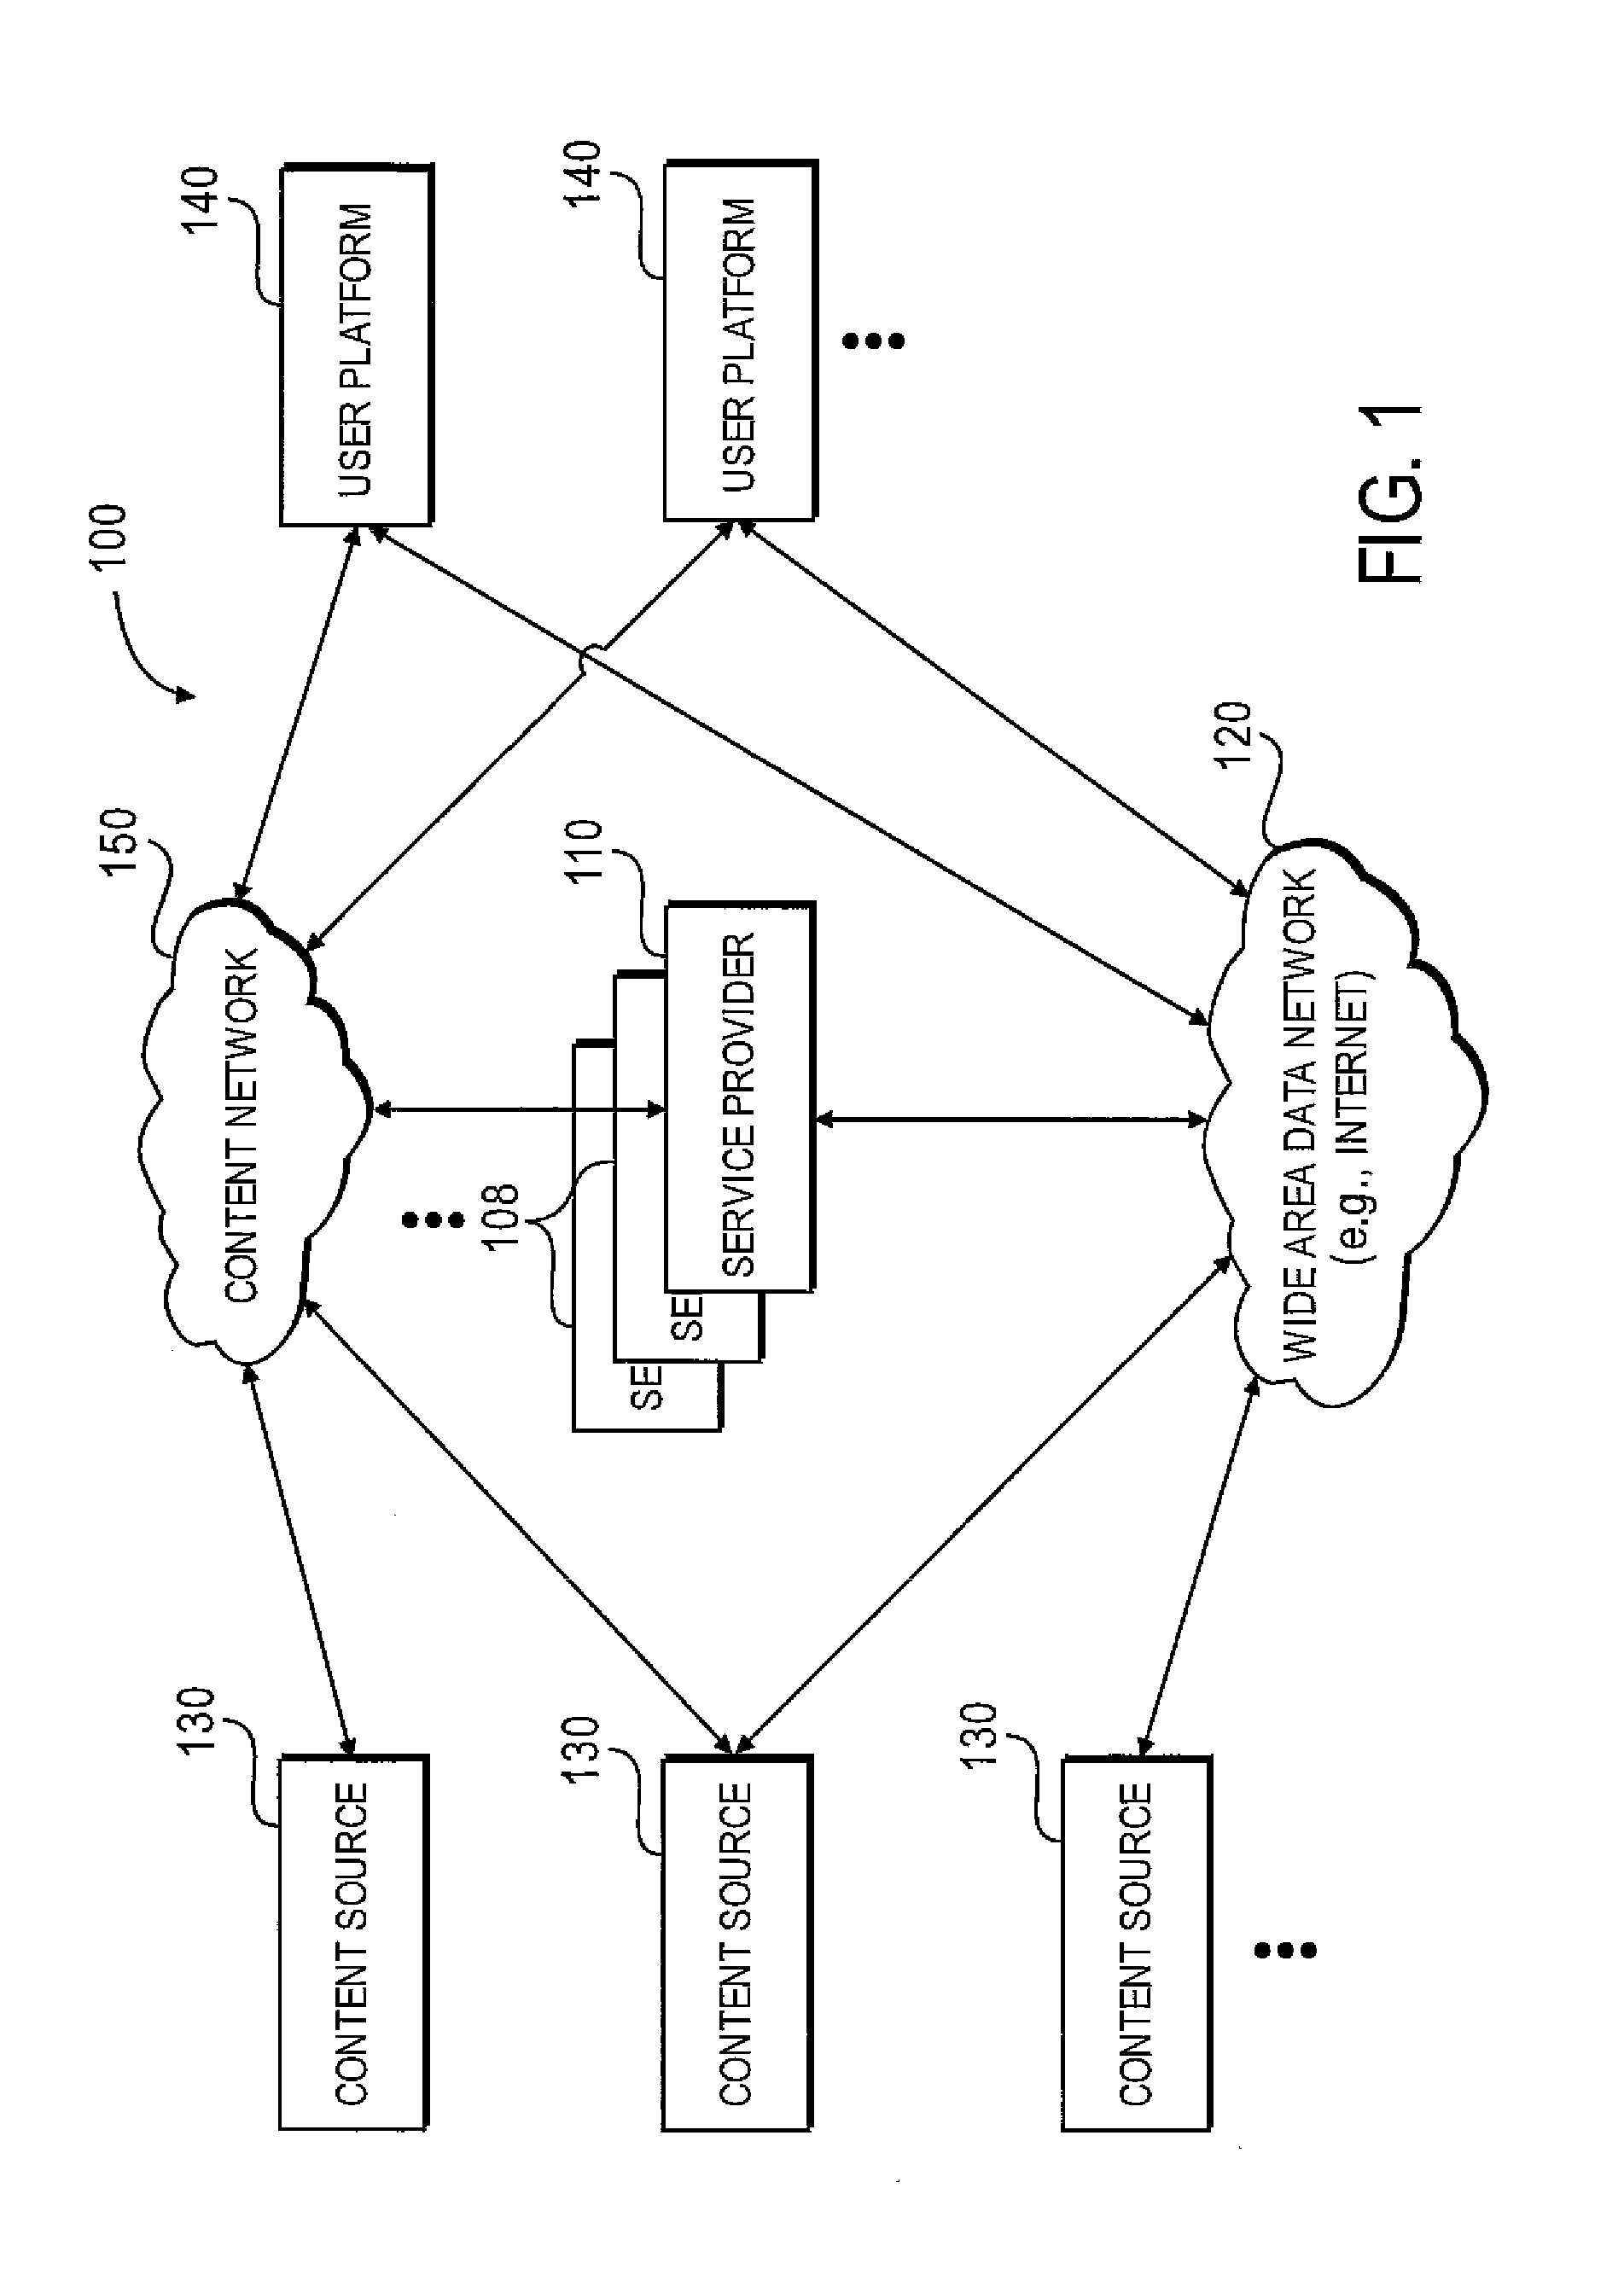 System and method for generating multimedia recommendations by using artificial intelligence concept matching and latent semantic analysis